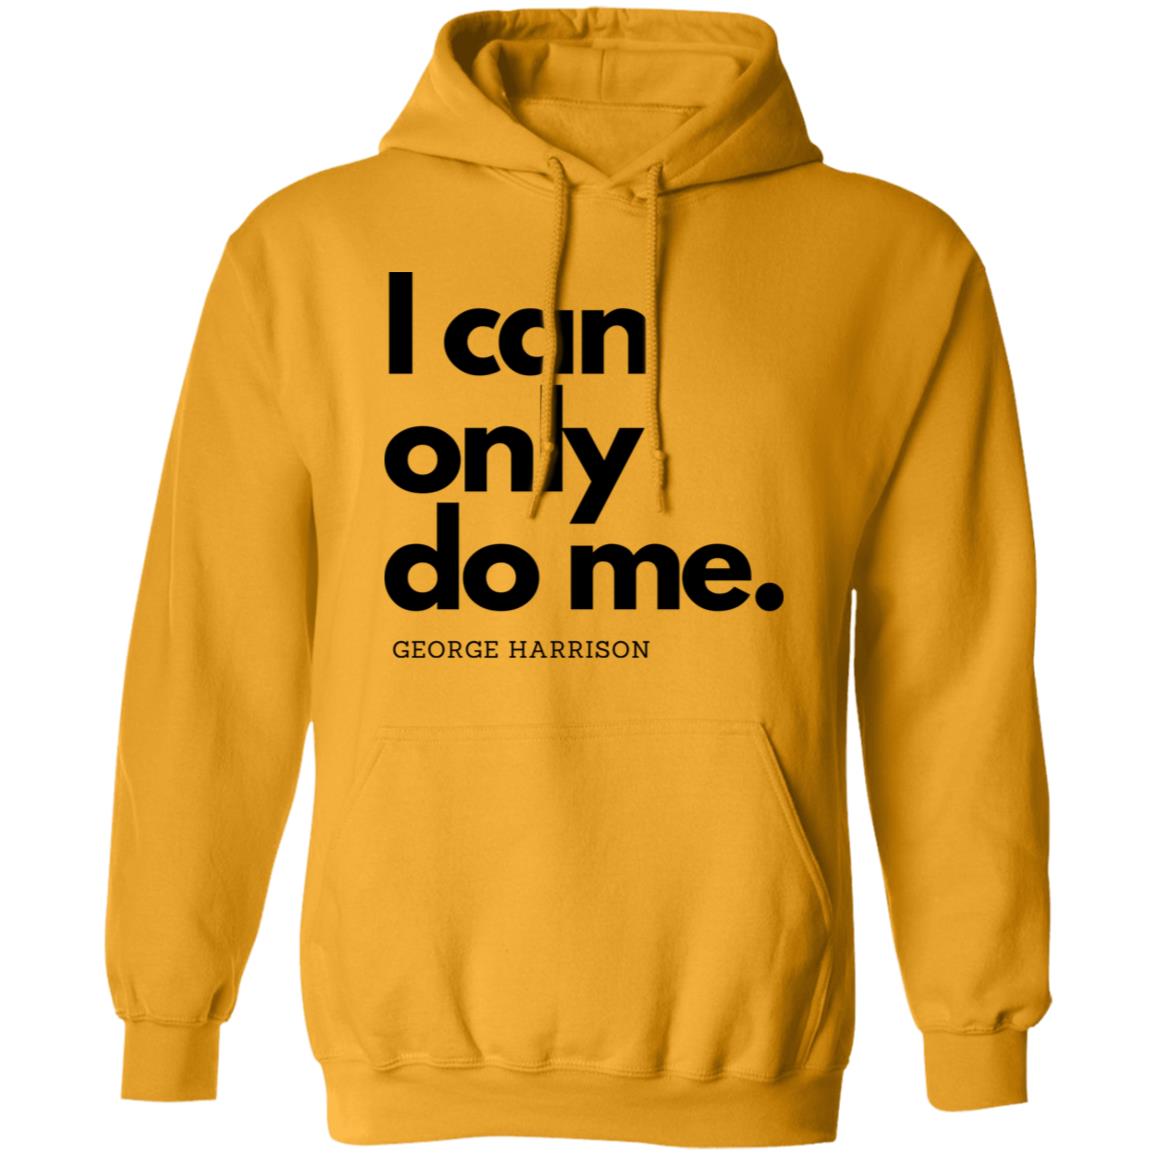 I can only do me. Hoodie